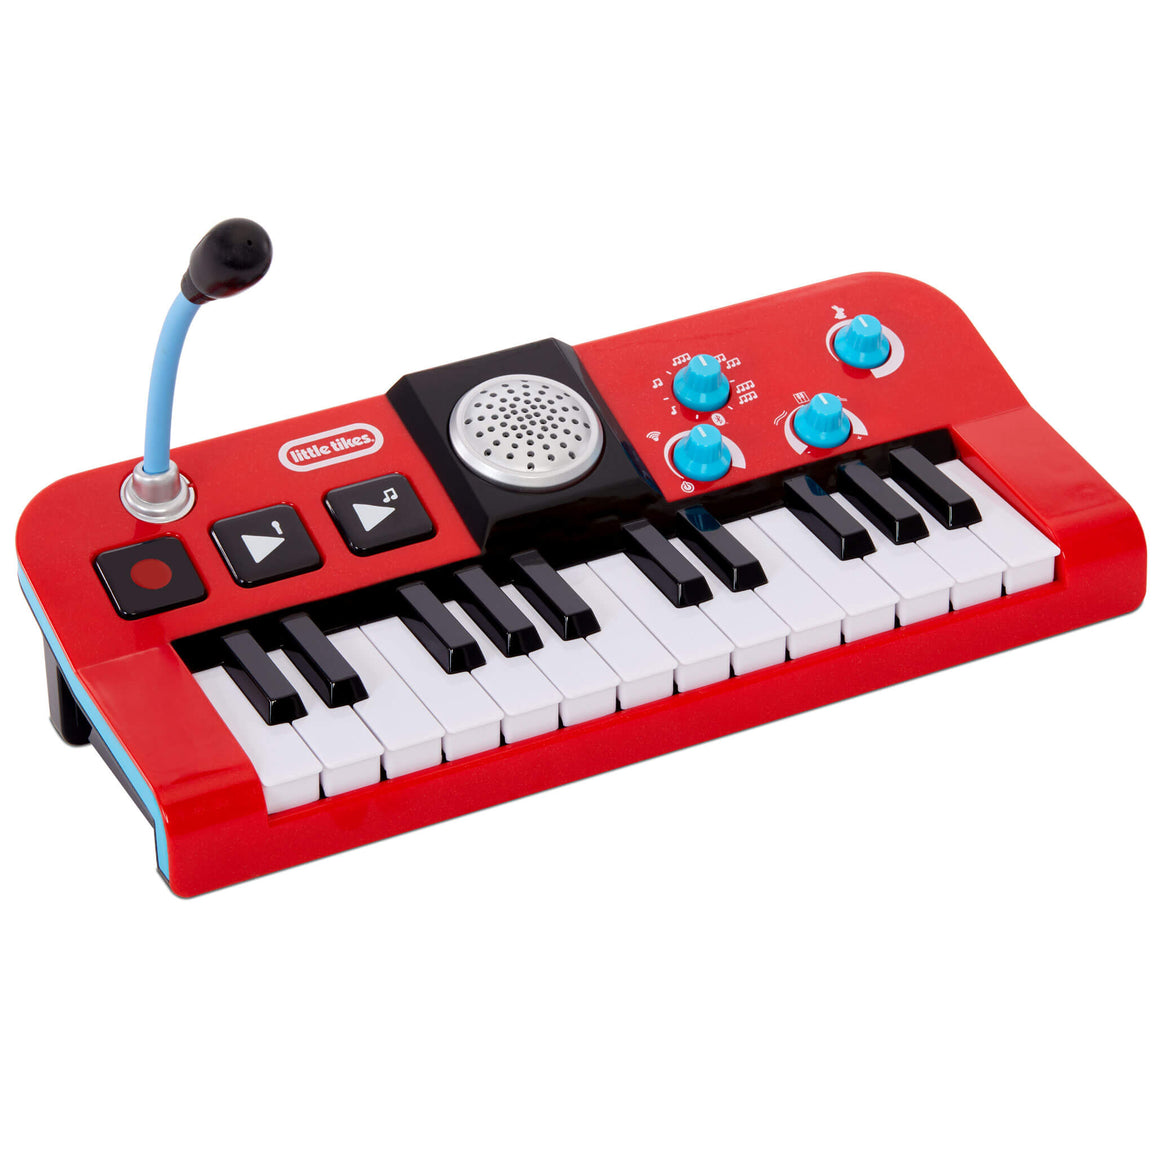 My Real Jam™ Keyboard Red - Official Little Tikes Website